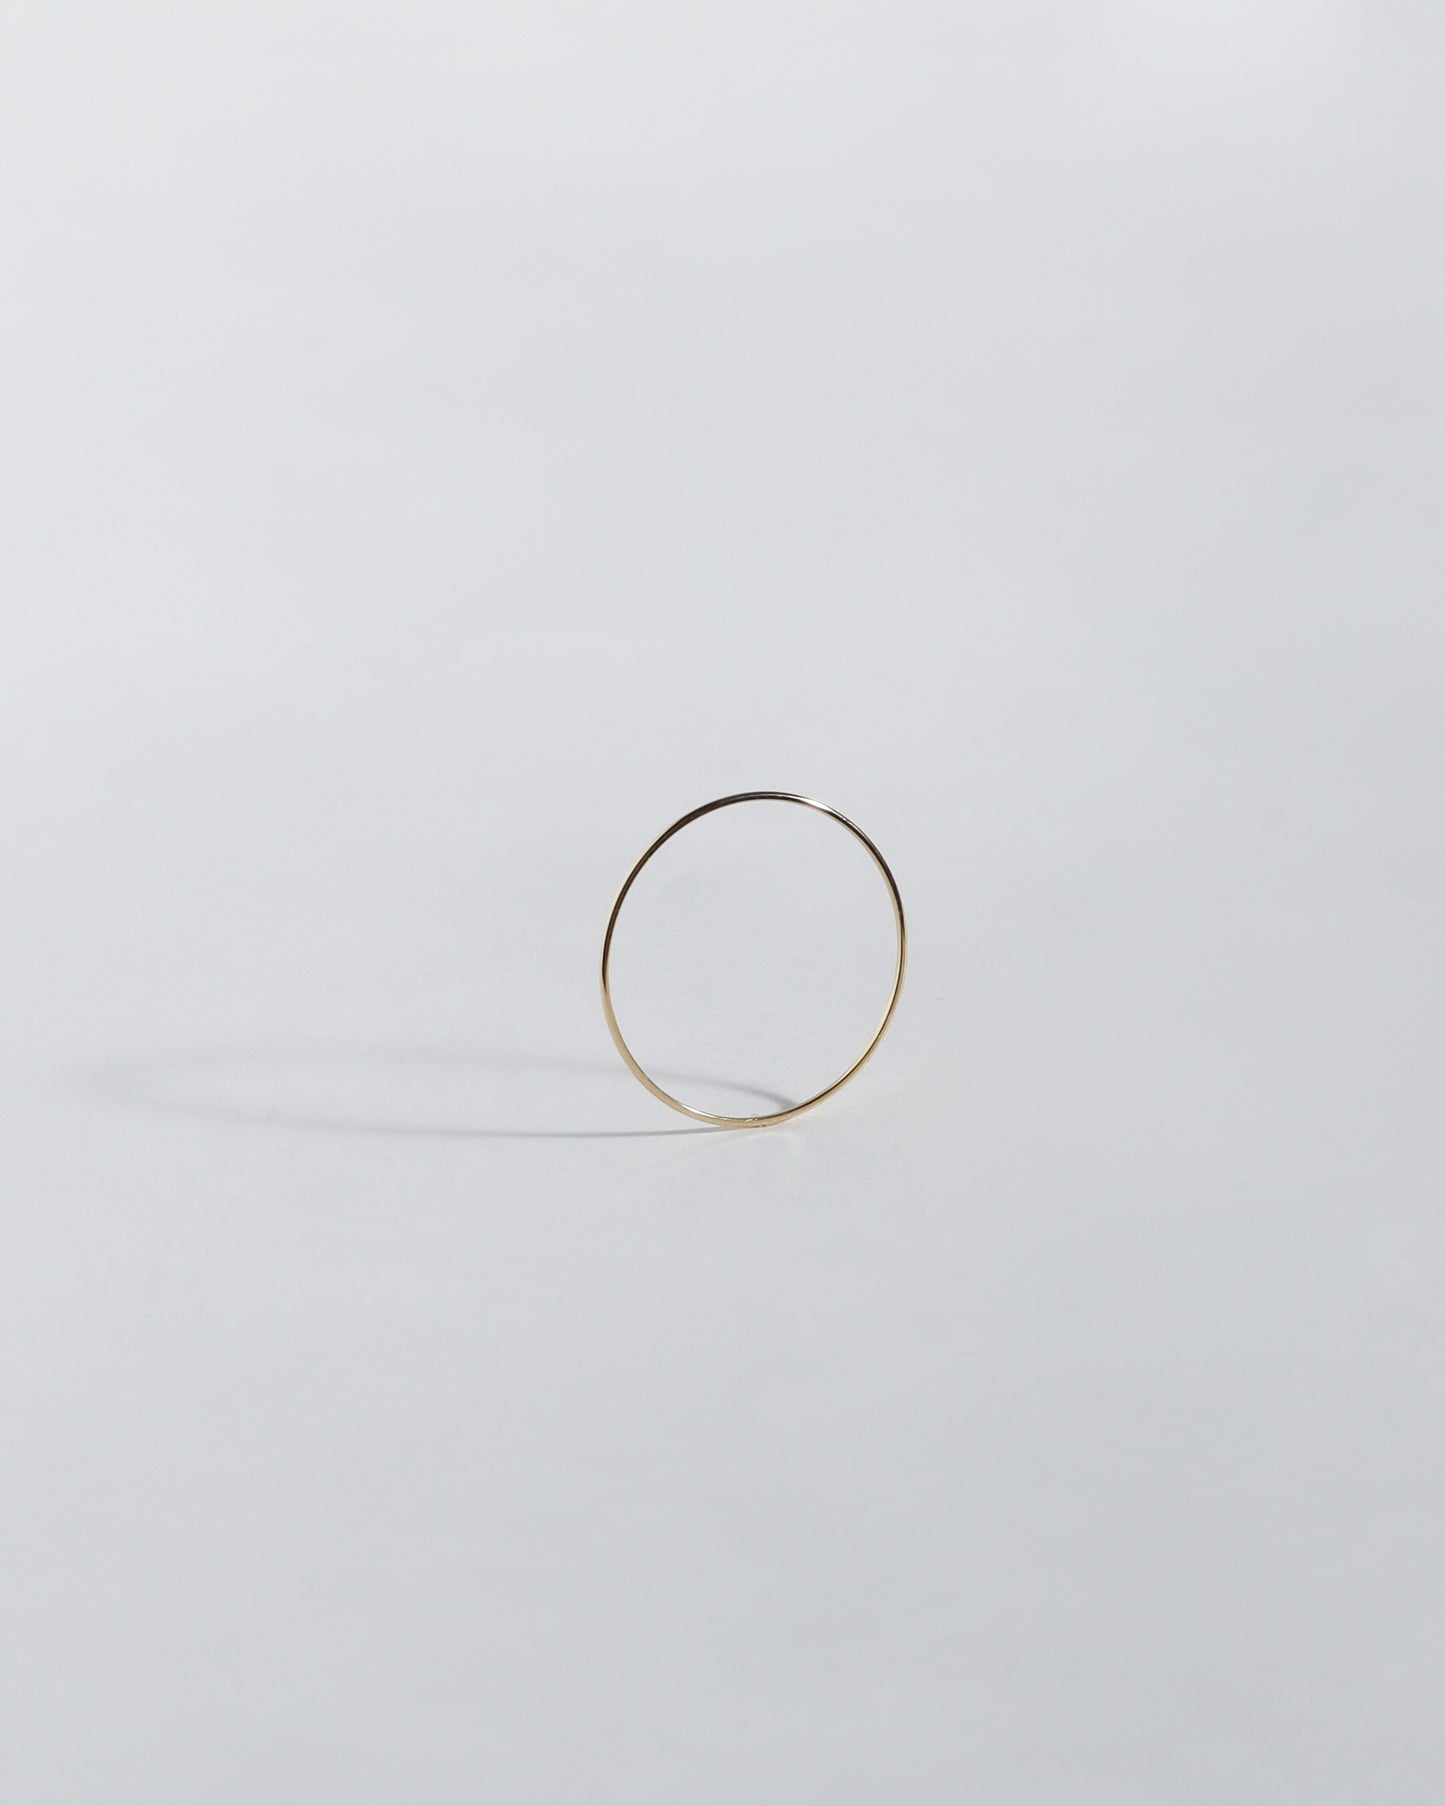 THE THINNEST RING